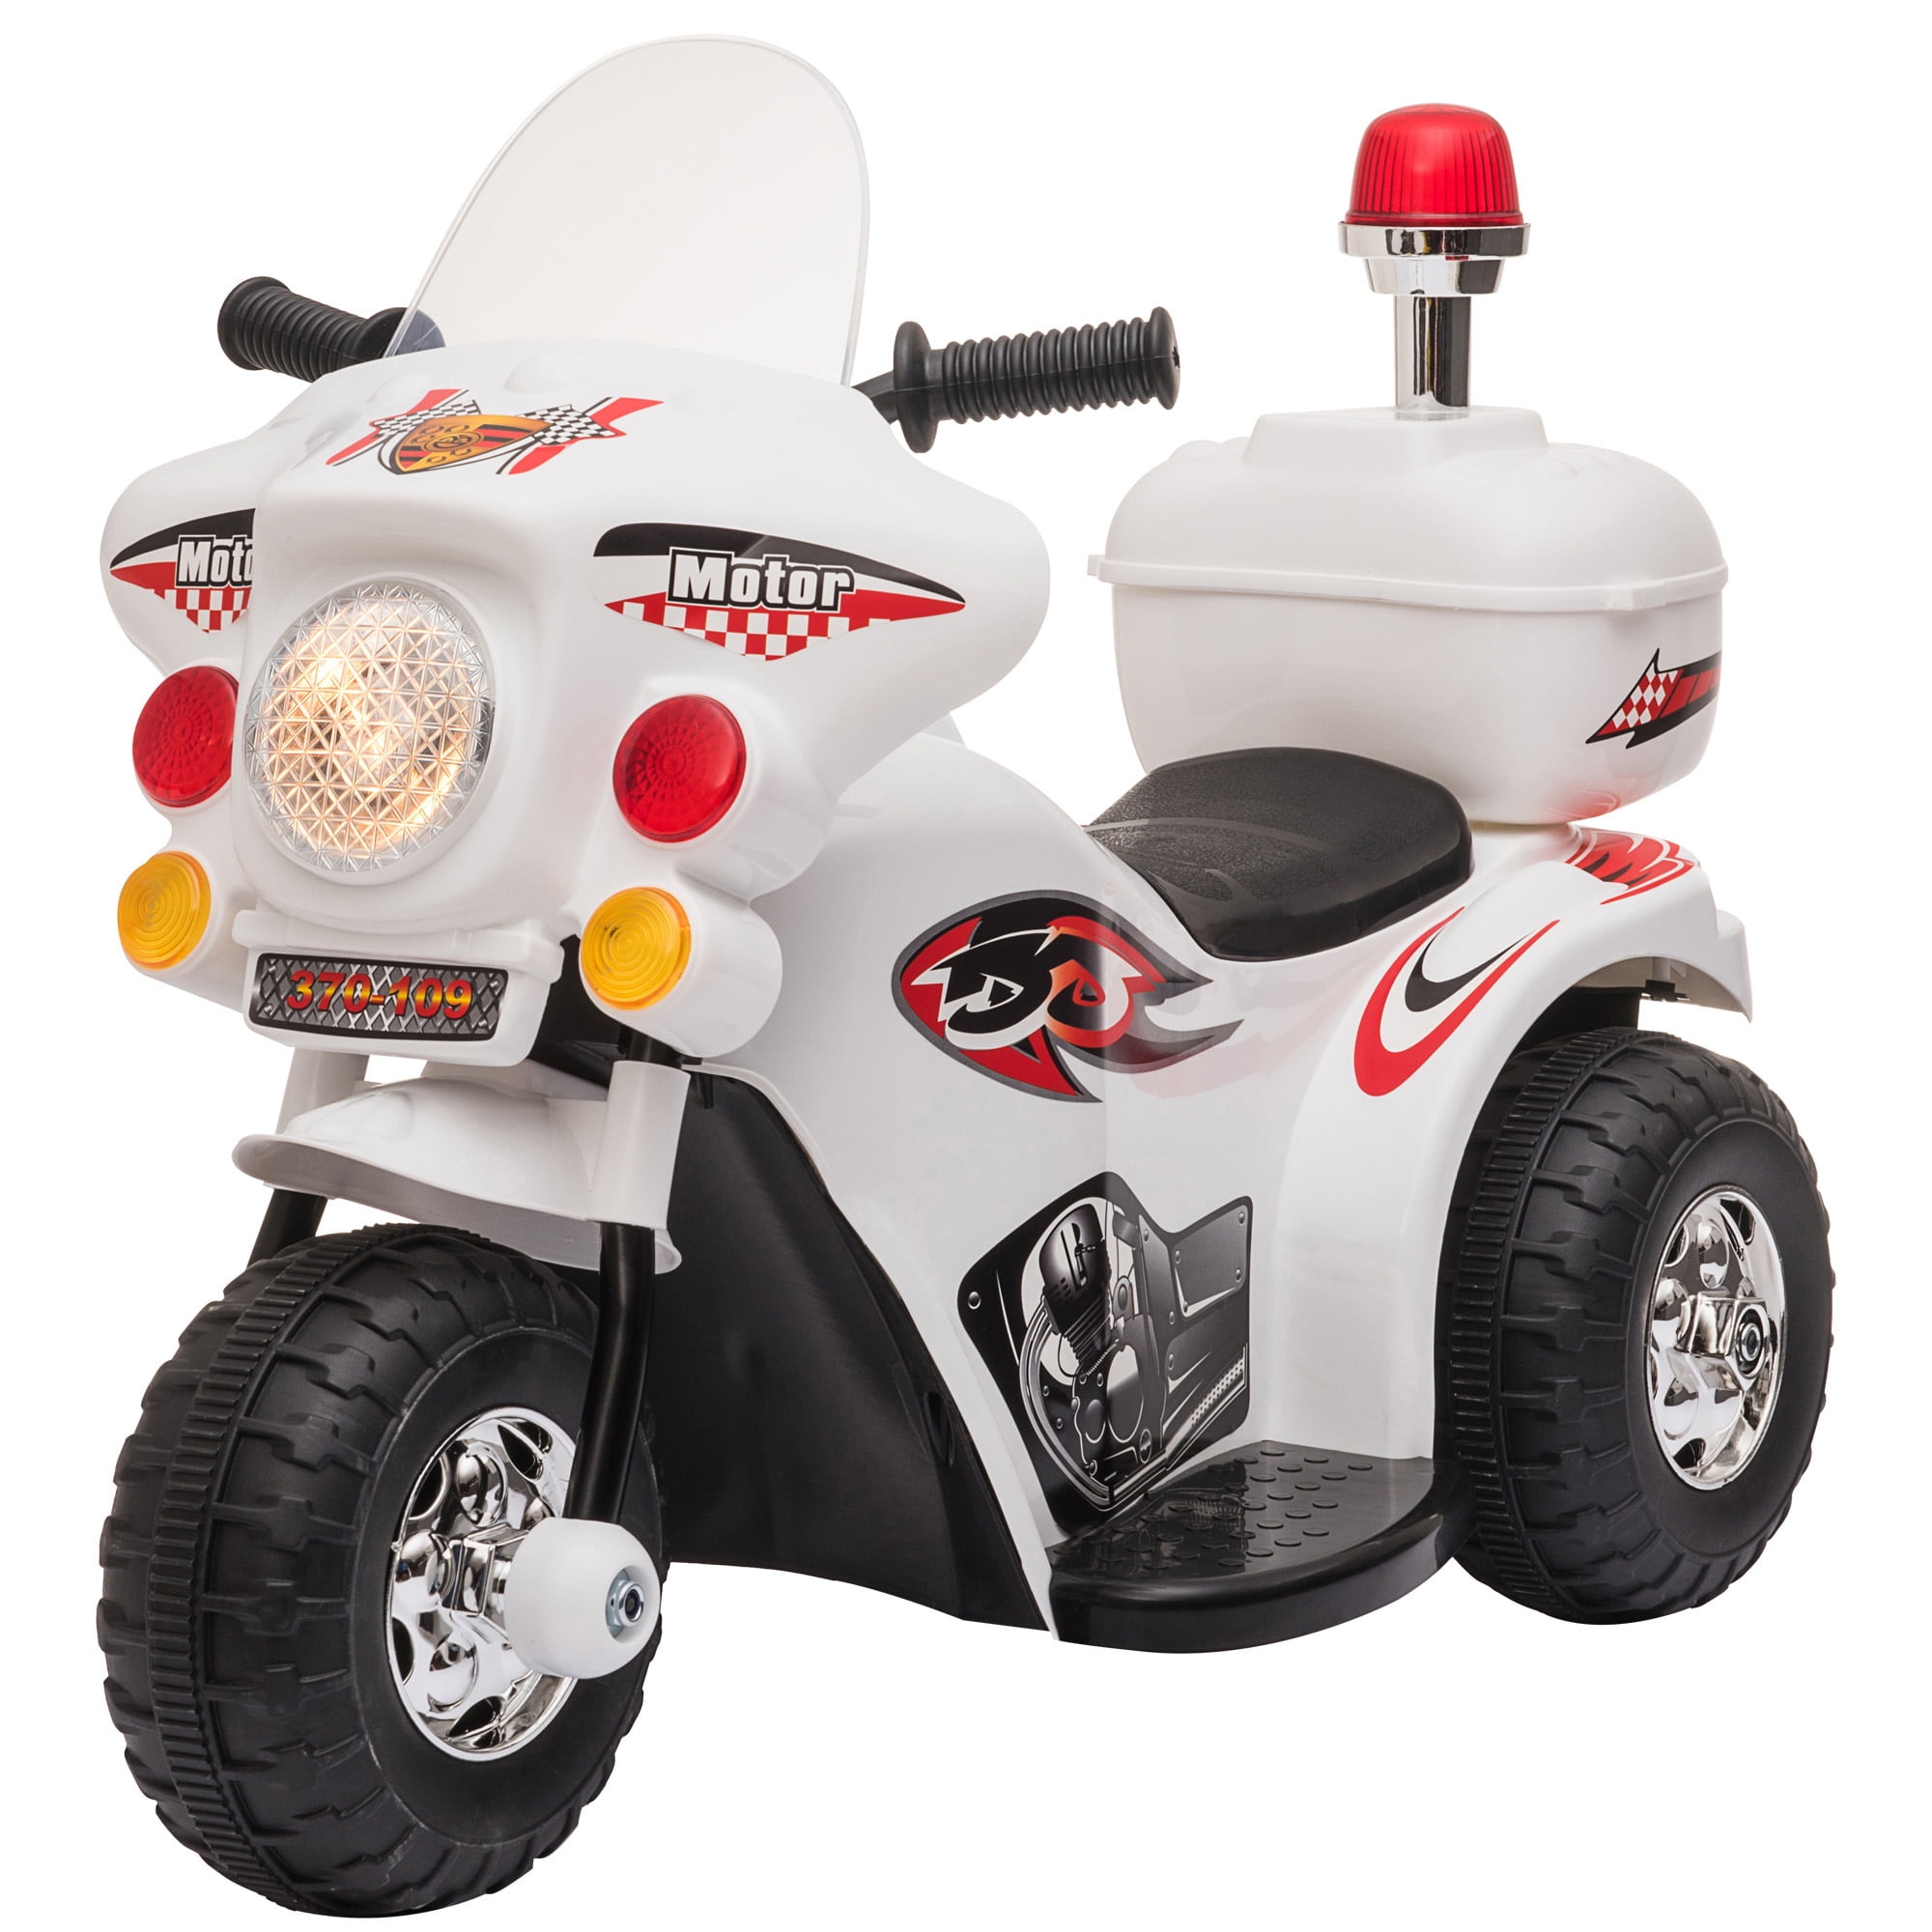 Details about   3 Wheel Kids Ride On Motorcycle 6V Battery Powered Electric Toy Power Bicycle♫ 